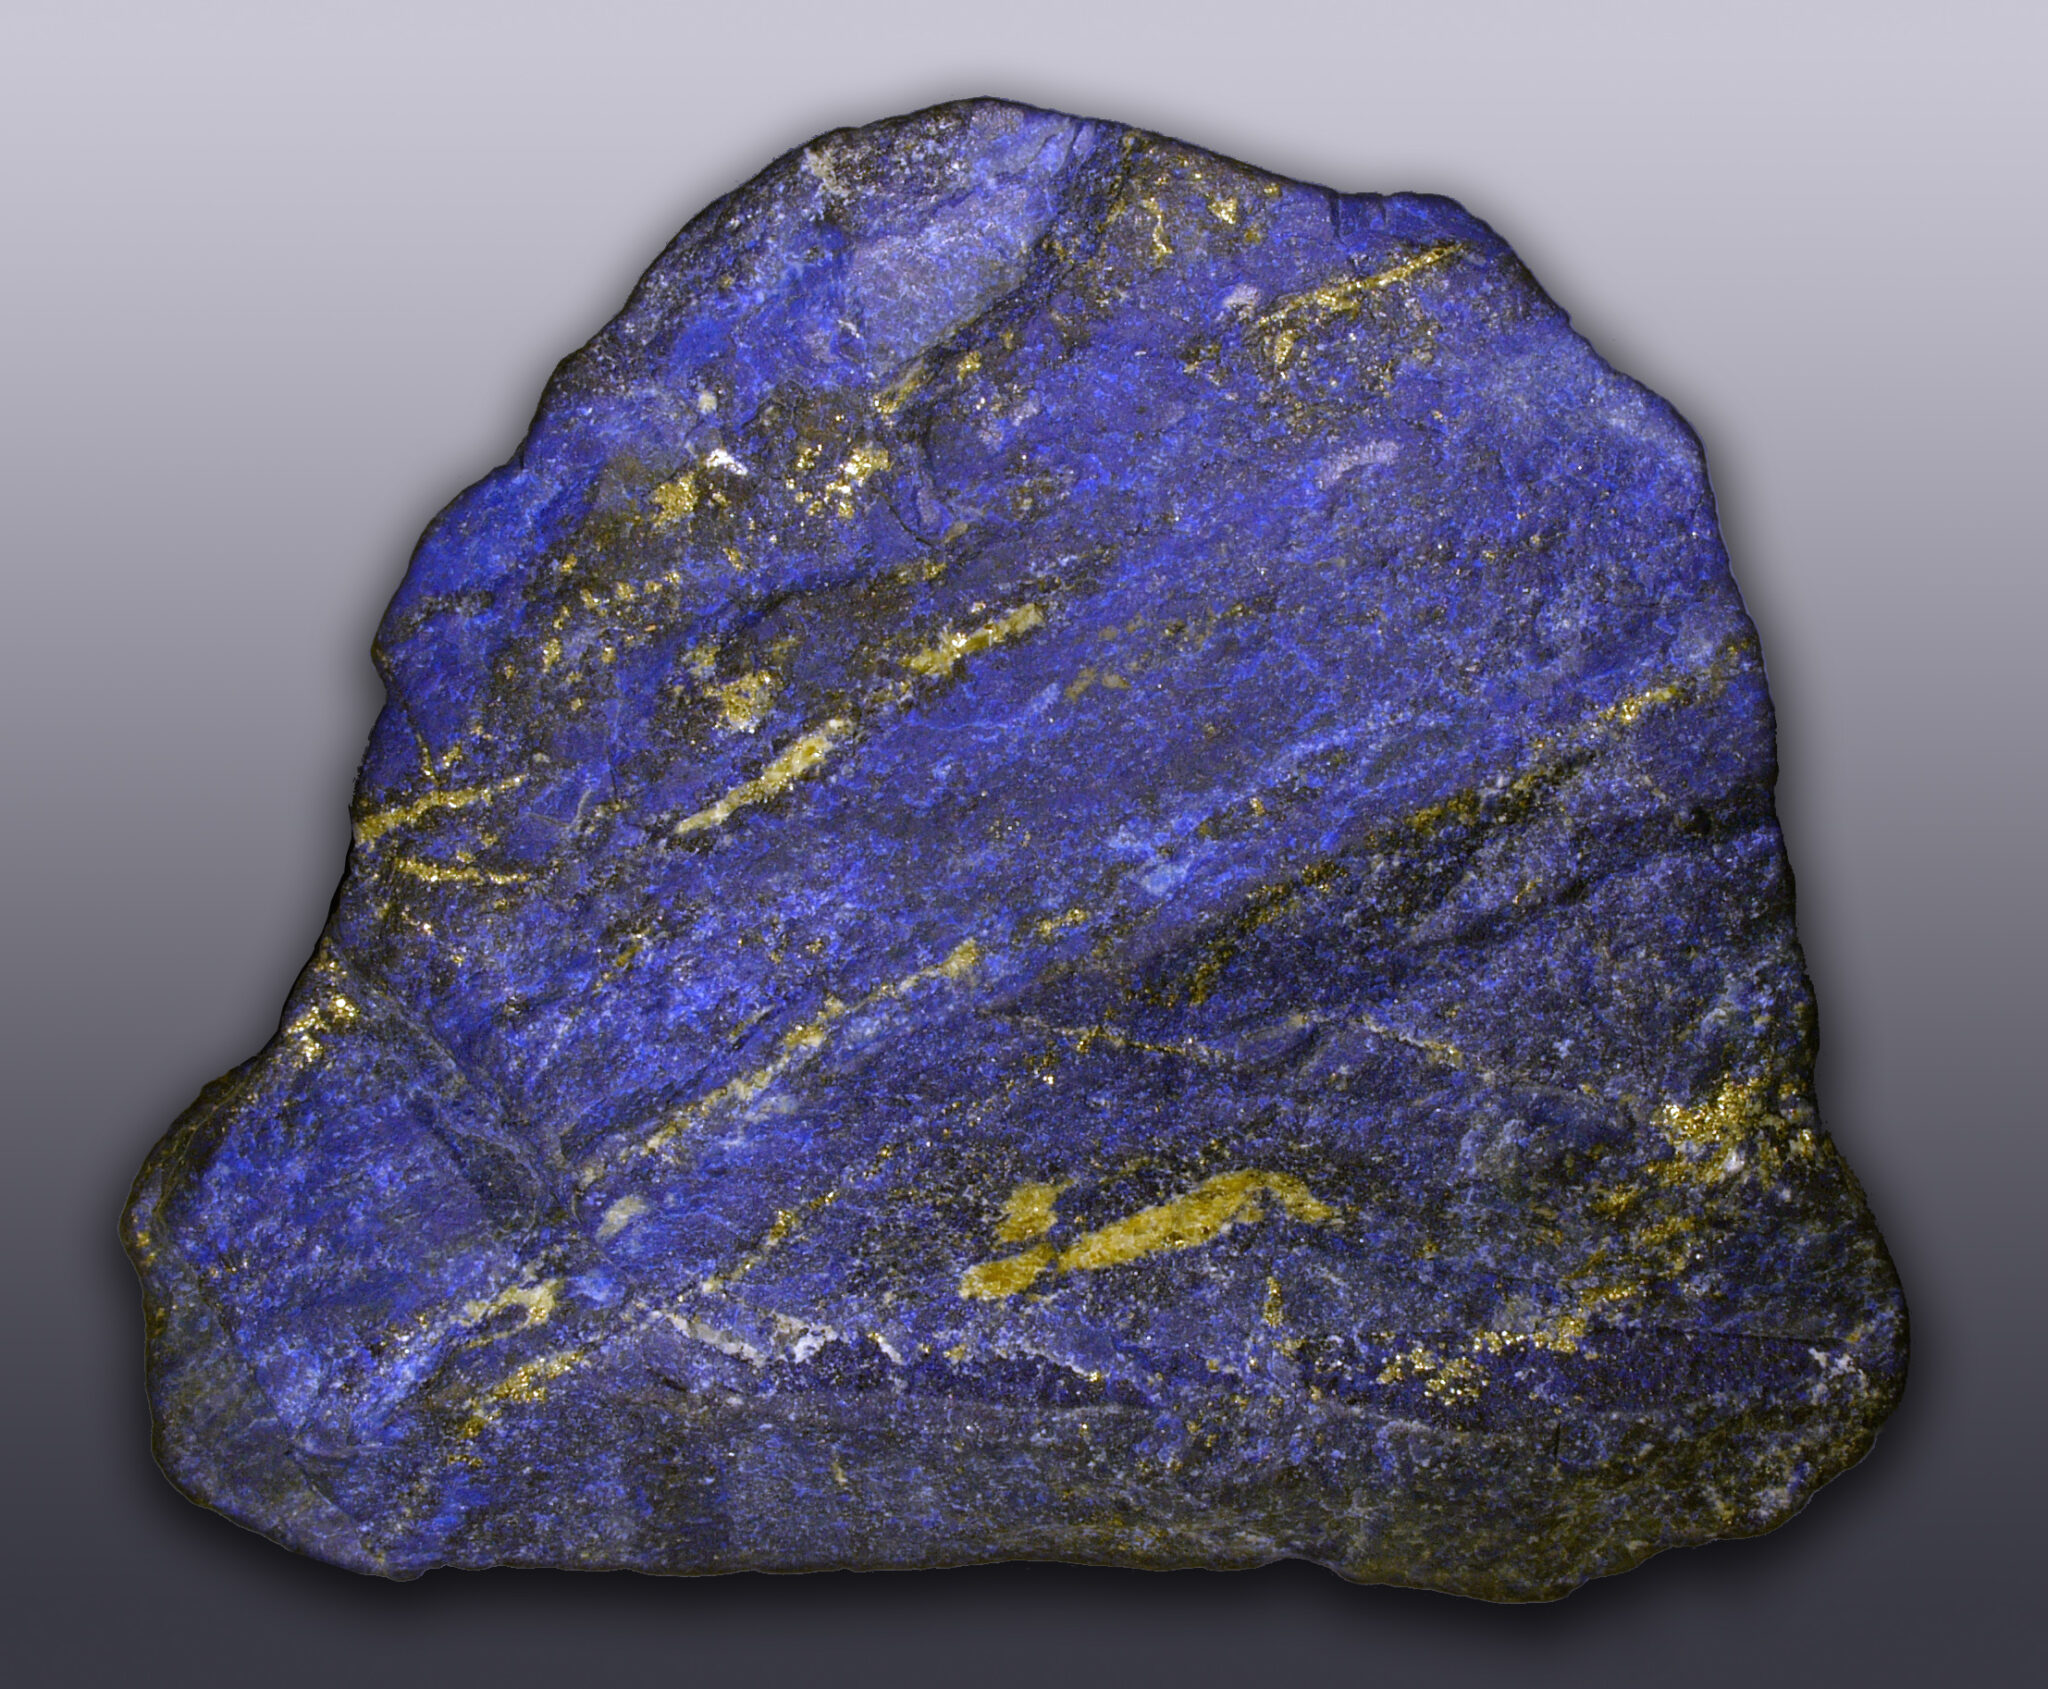 where does the word ultramarine lapis lazuli come from and what does ultramarine mean